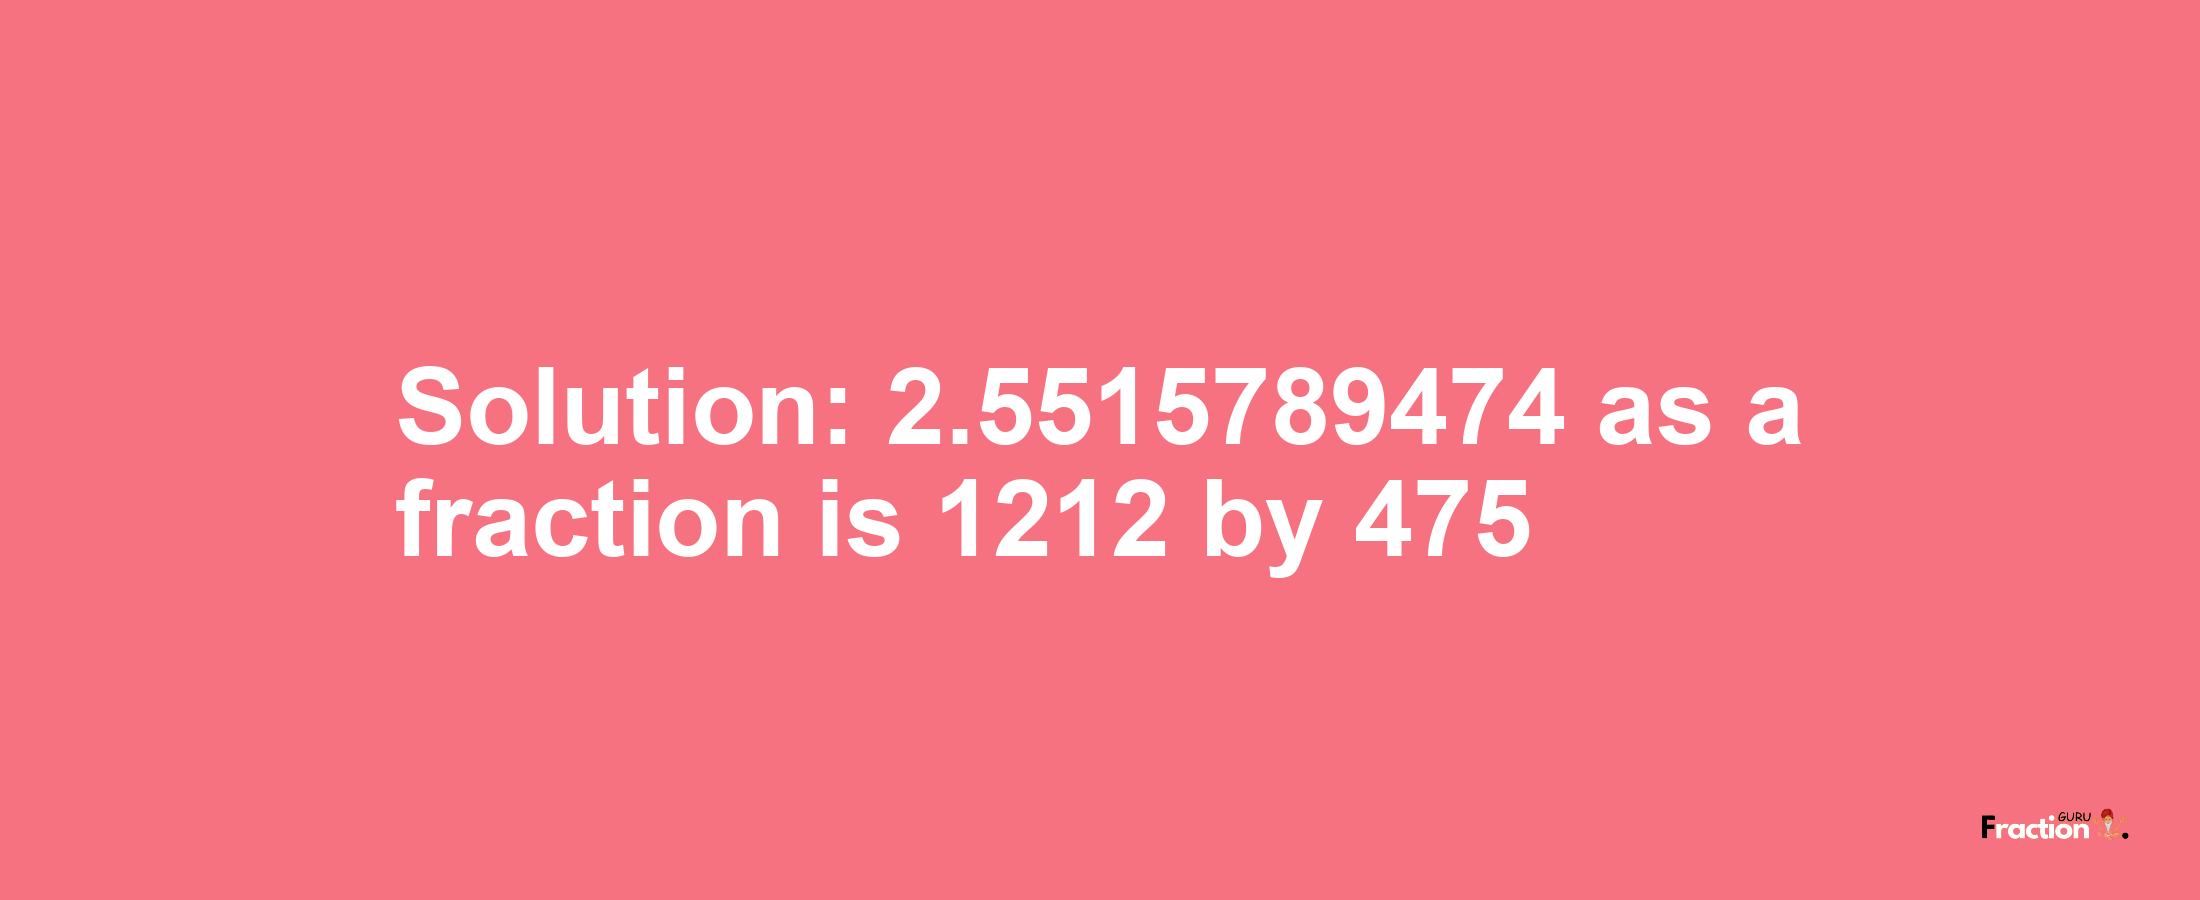 Solution:2.5515789474 as a fraction is 1212/475